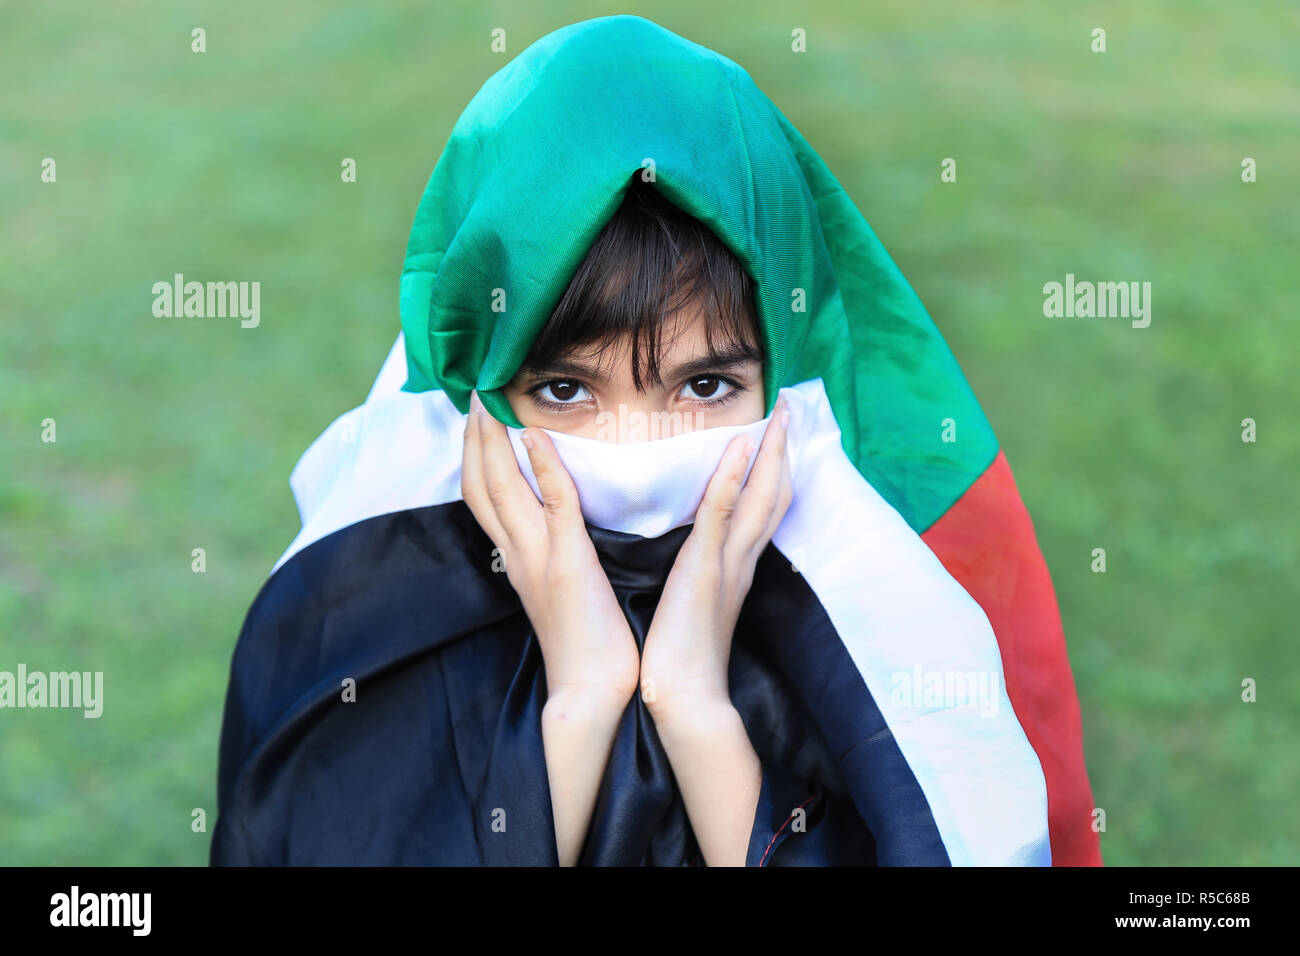 Palestinian little girl masked with Palestinian flag. Stock Photo